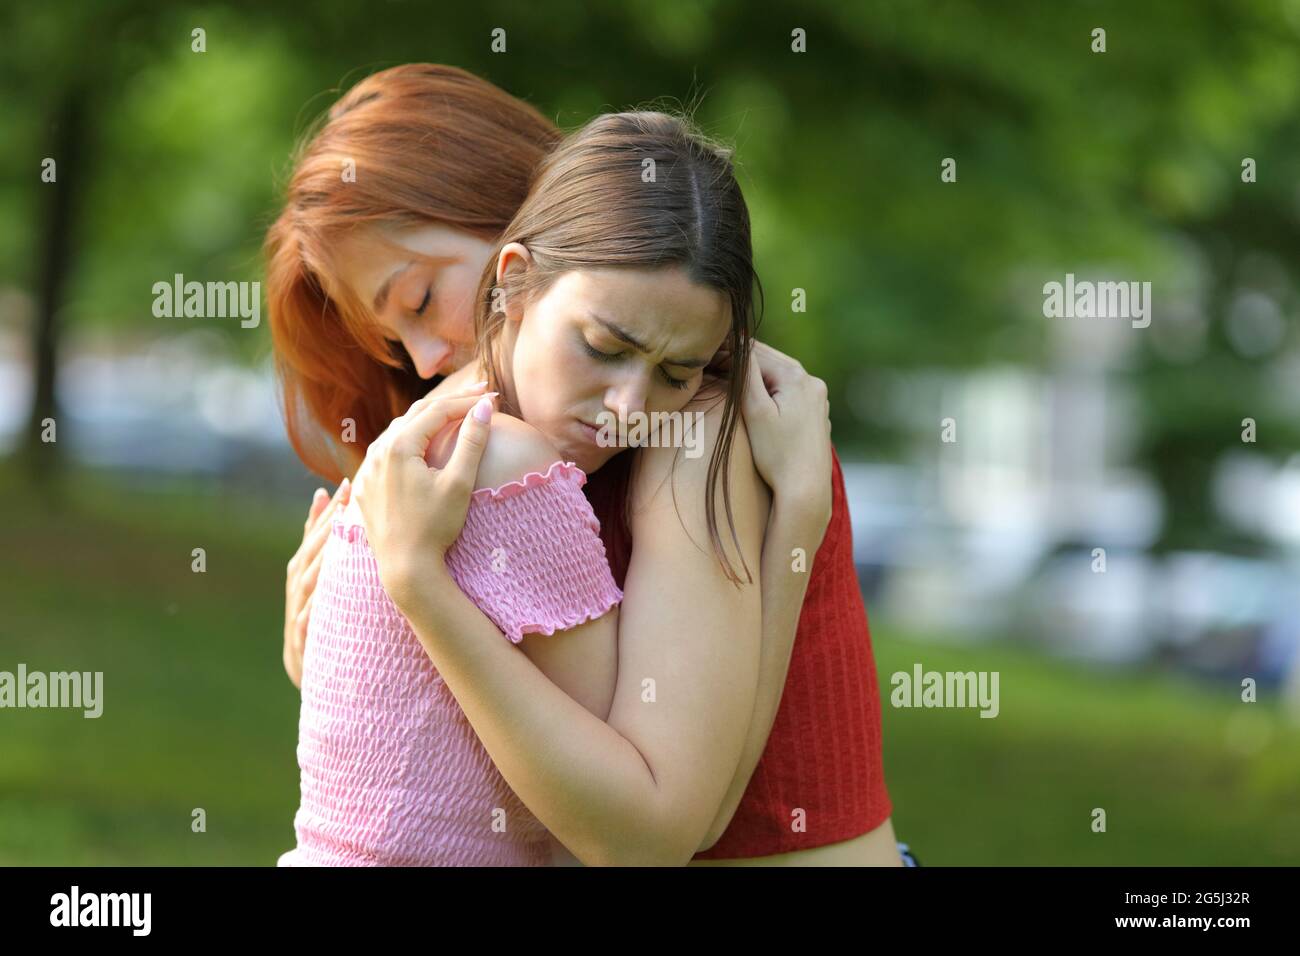 Sad girls reconciliating after argument hugging in a park Stock Photo